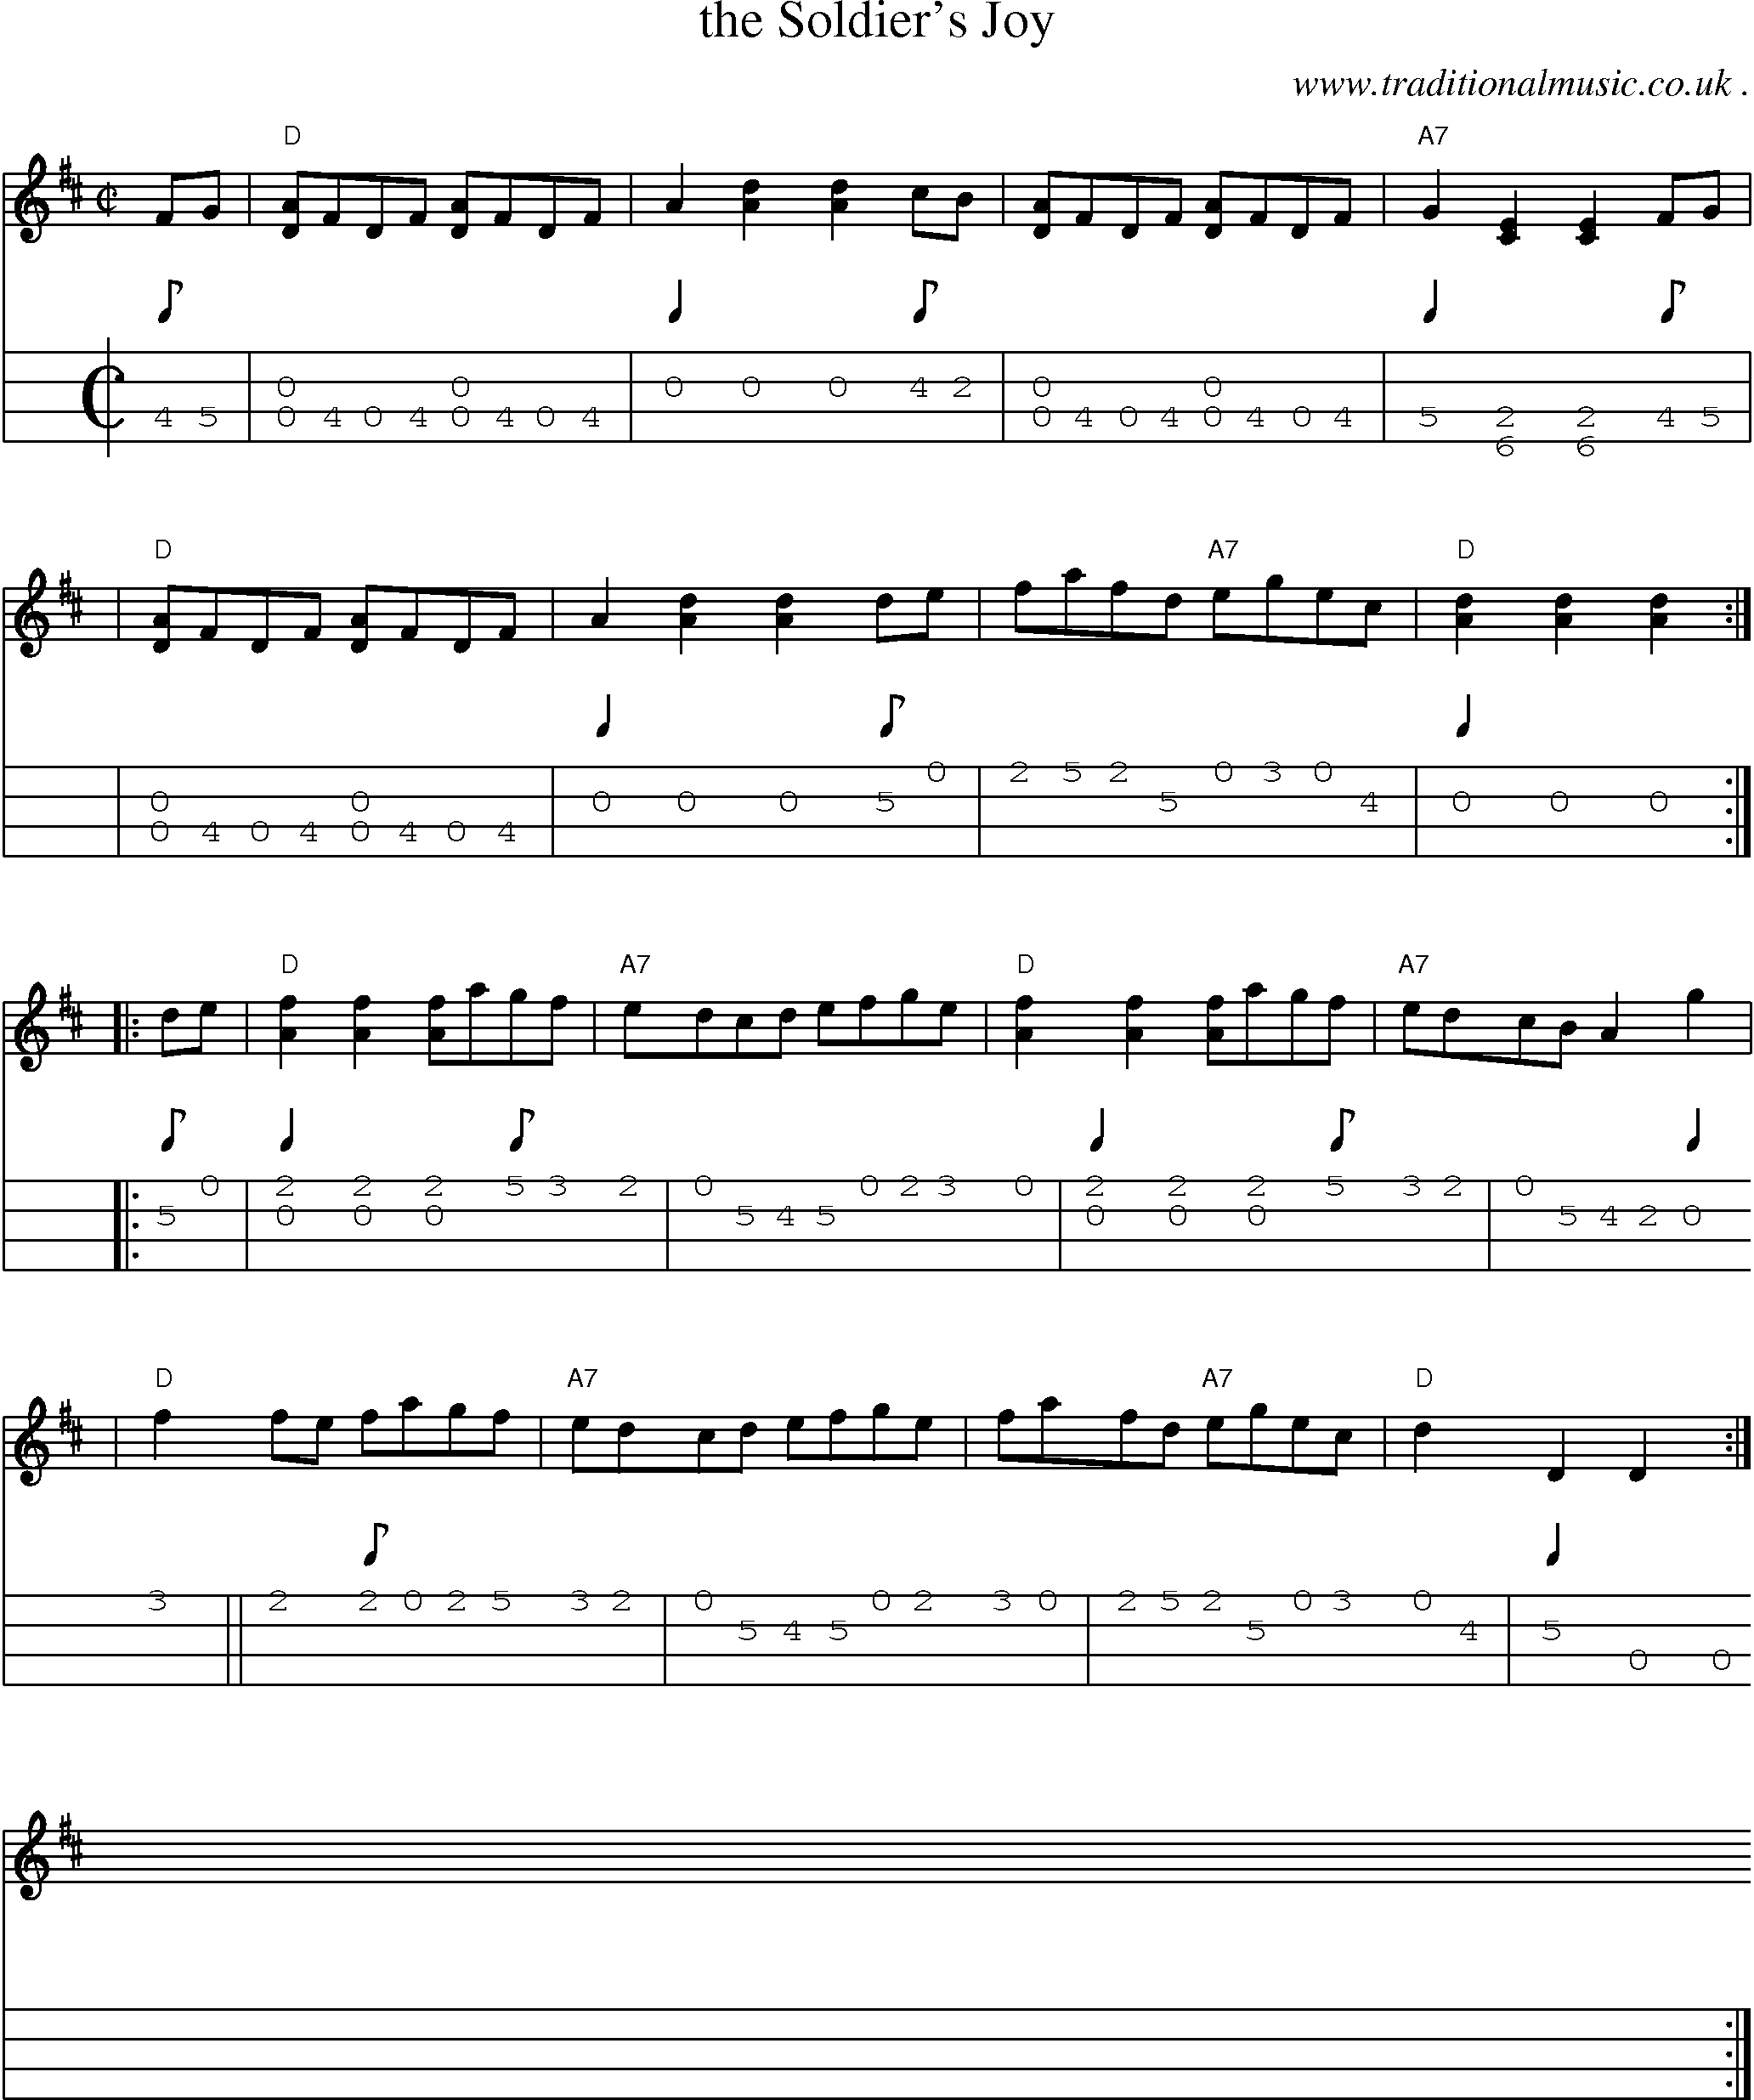 Sheet-music  score, Chords and Mandolin Tabs for The Soldiers Joy